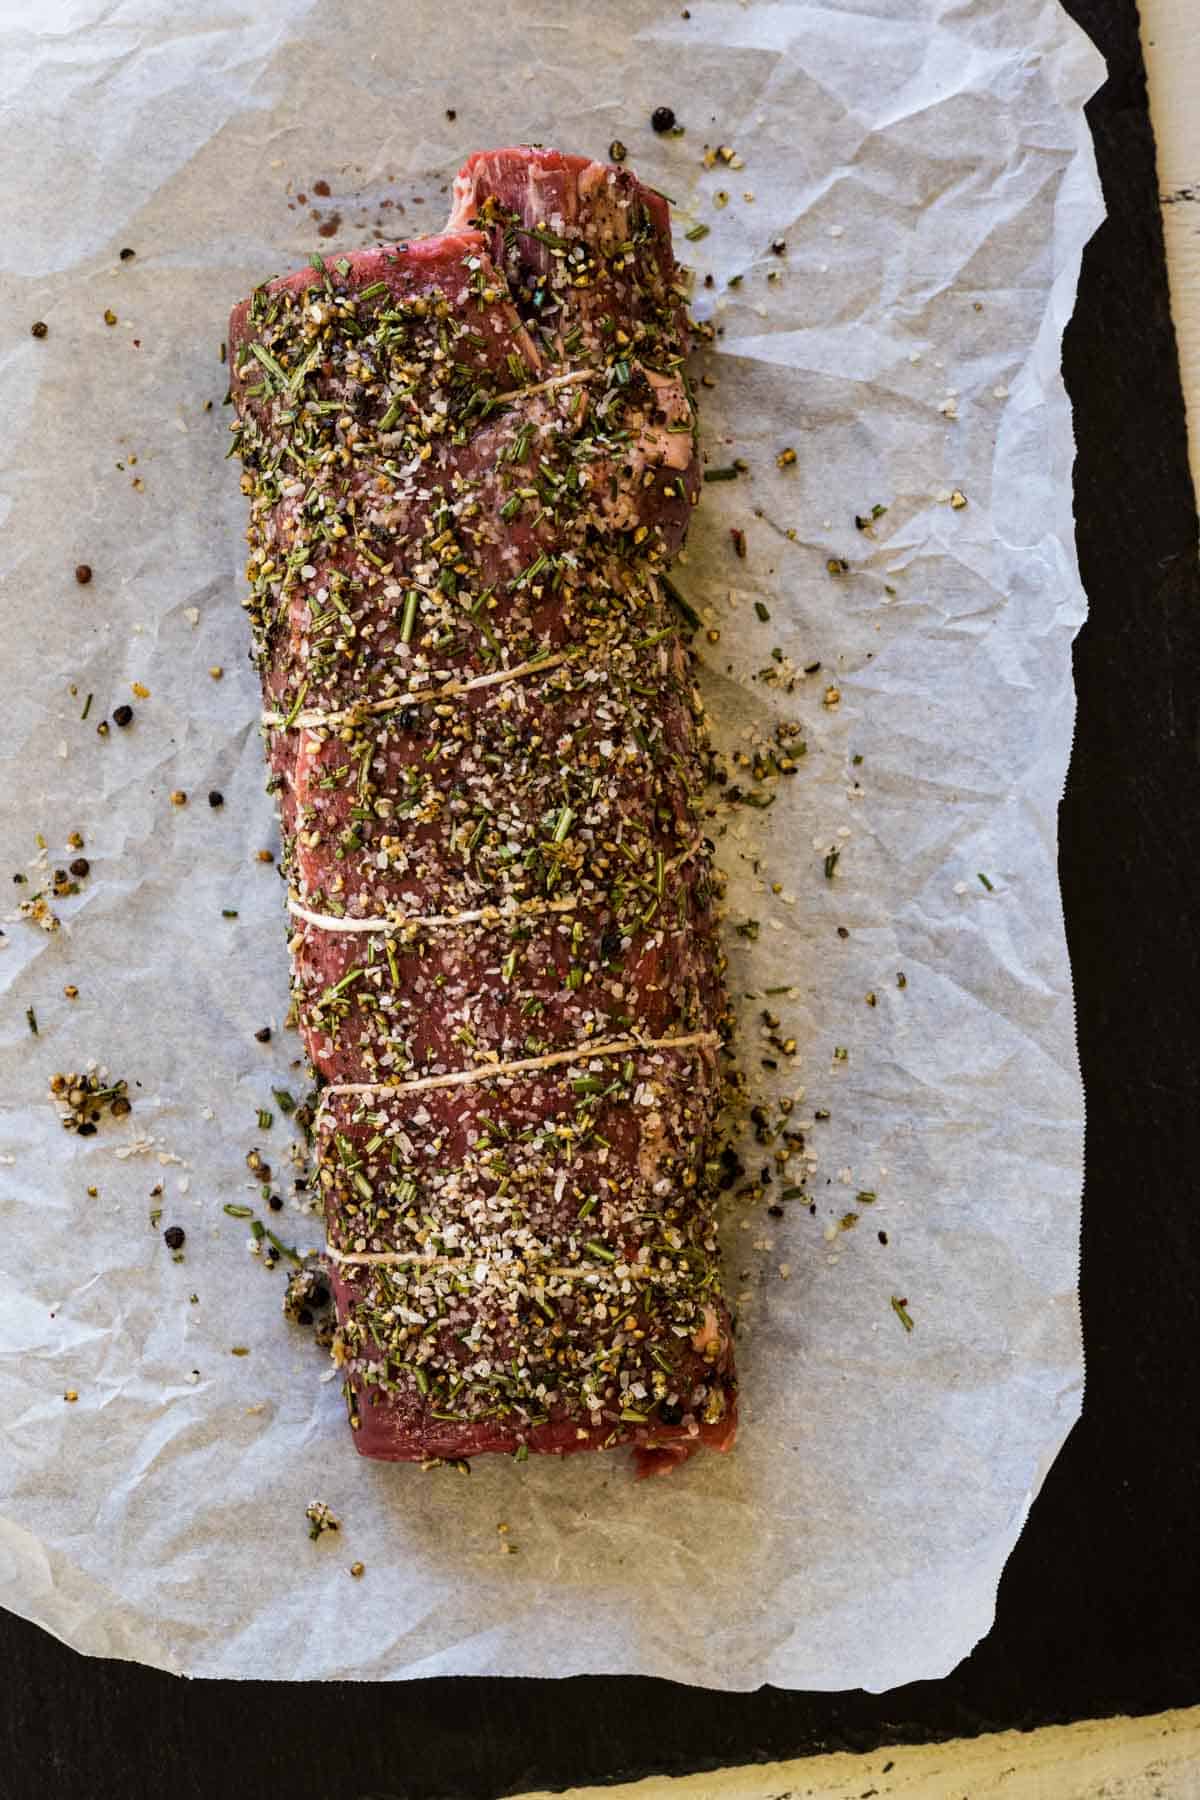 An uncooked beef tenderloin rubbed with pepper and herbs.